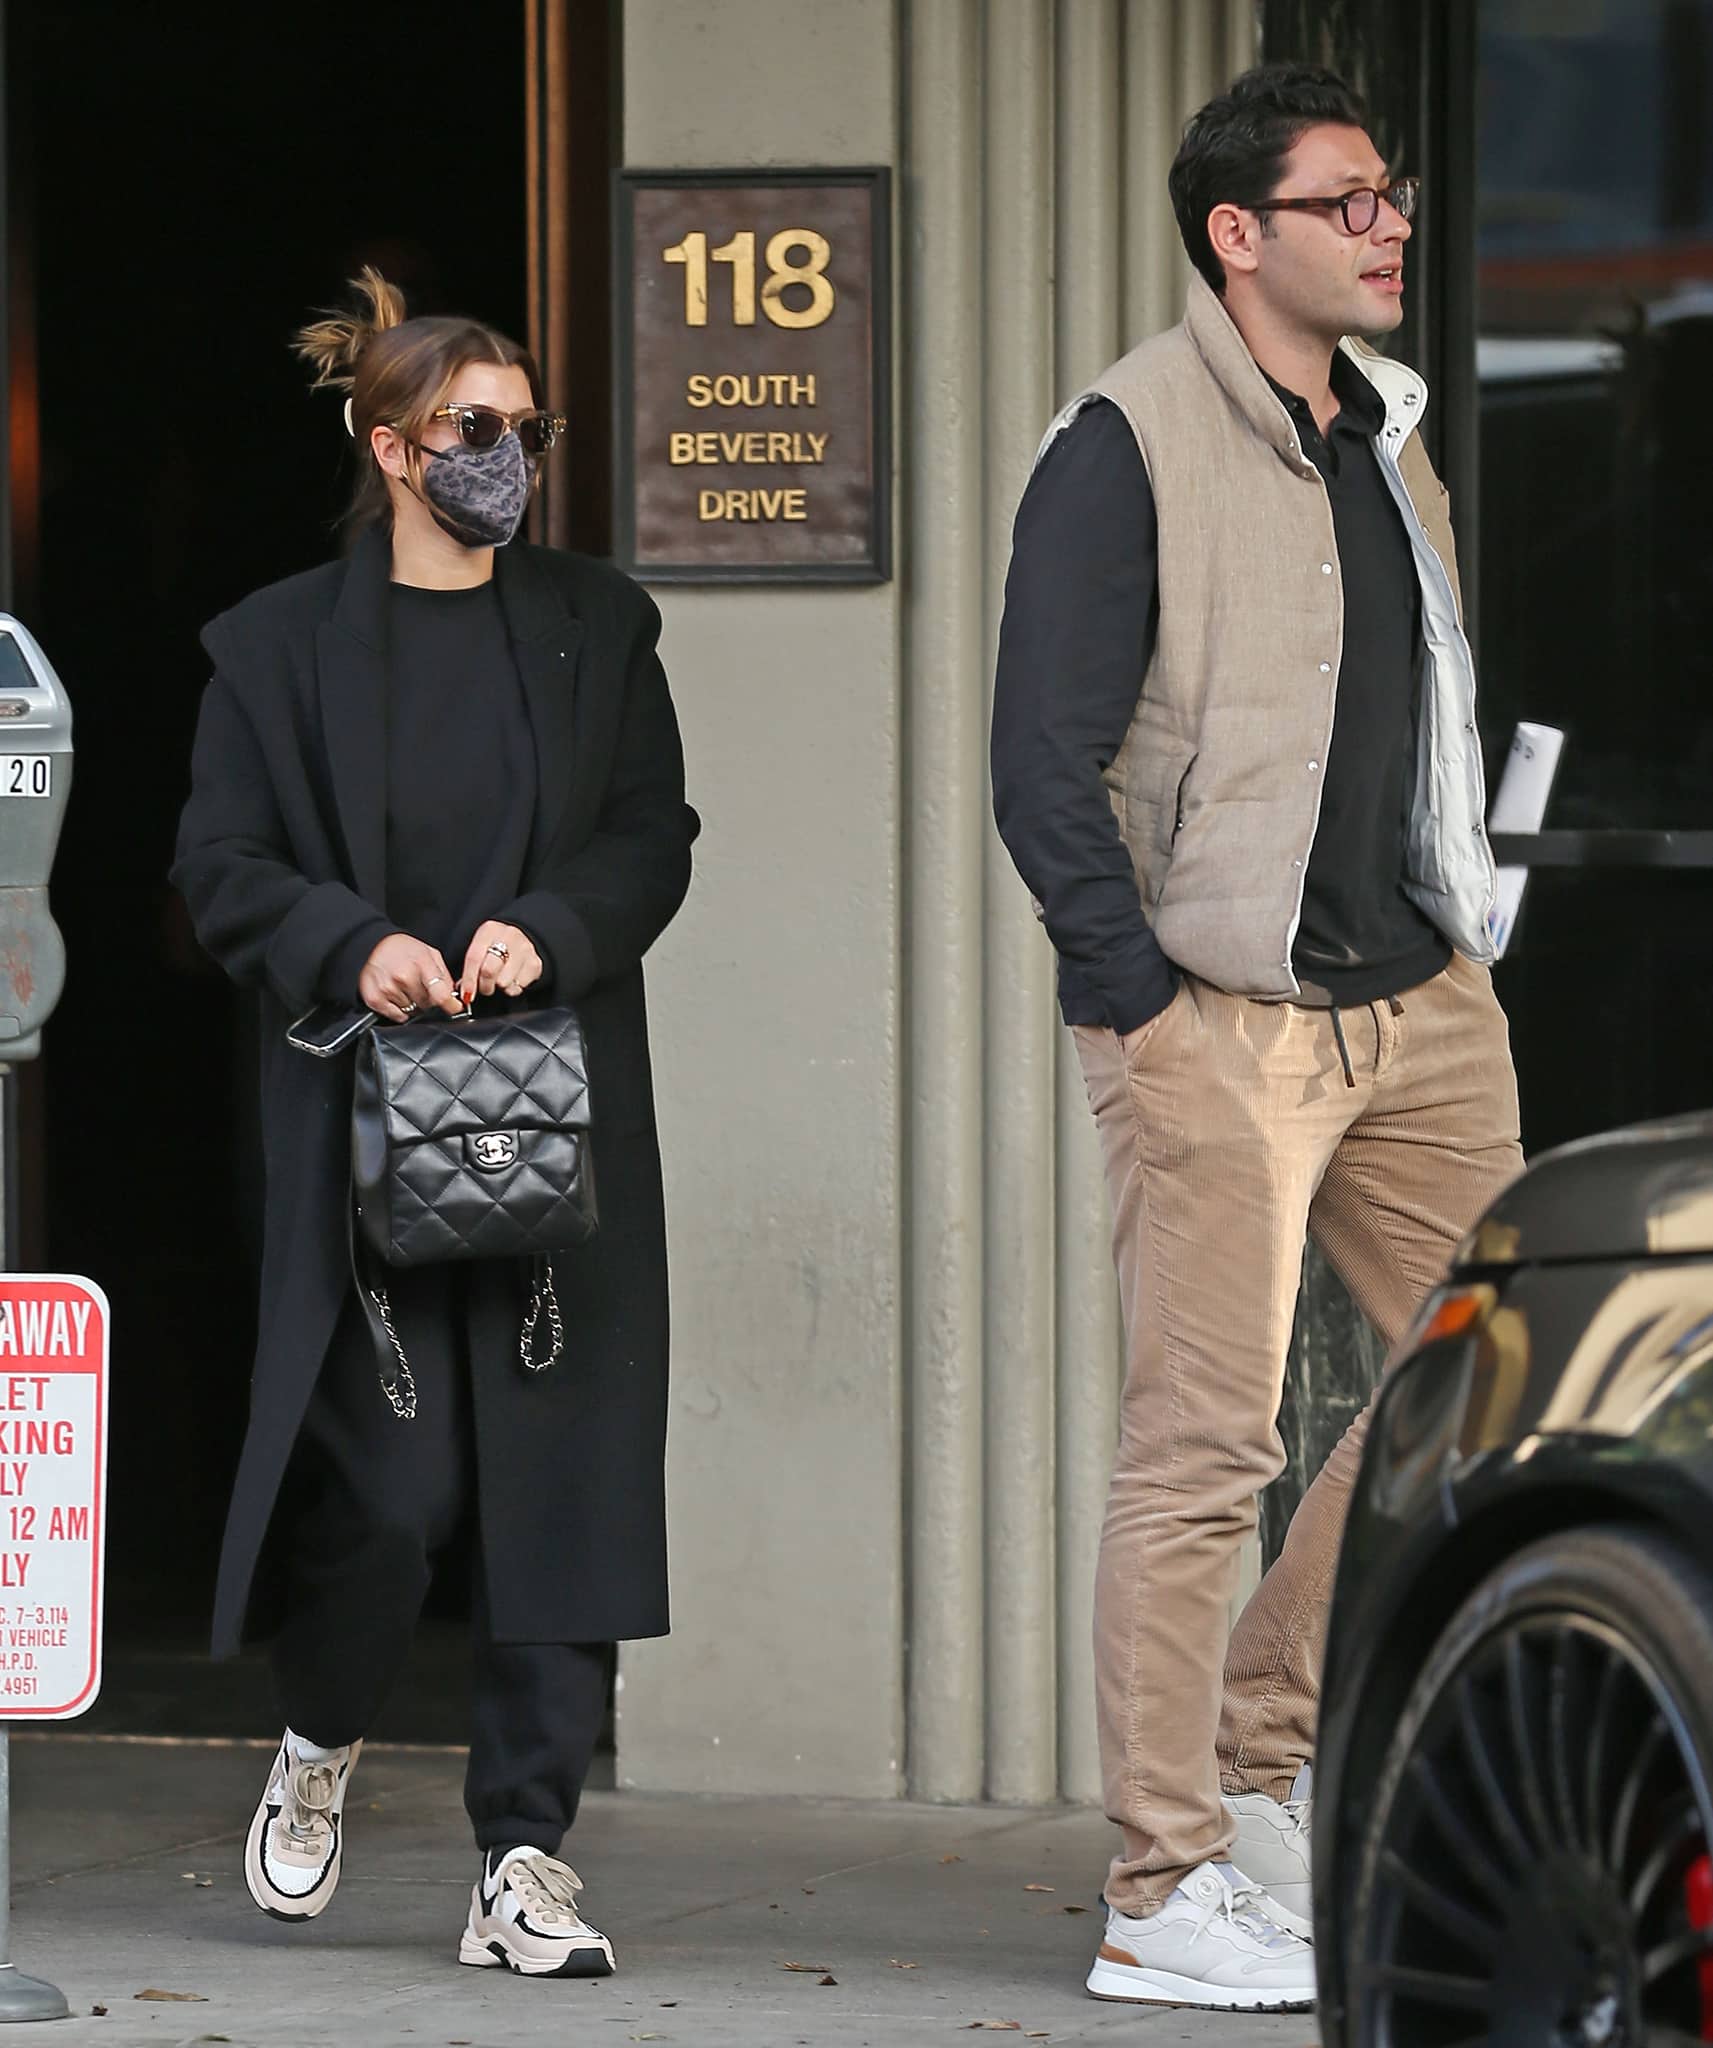 Sofia Richie and boyfriend Elliot Grainge leaving the South Beverly Grill in Beverly Hills on December 8, 2021